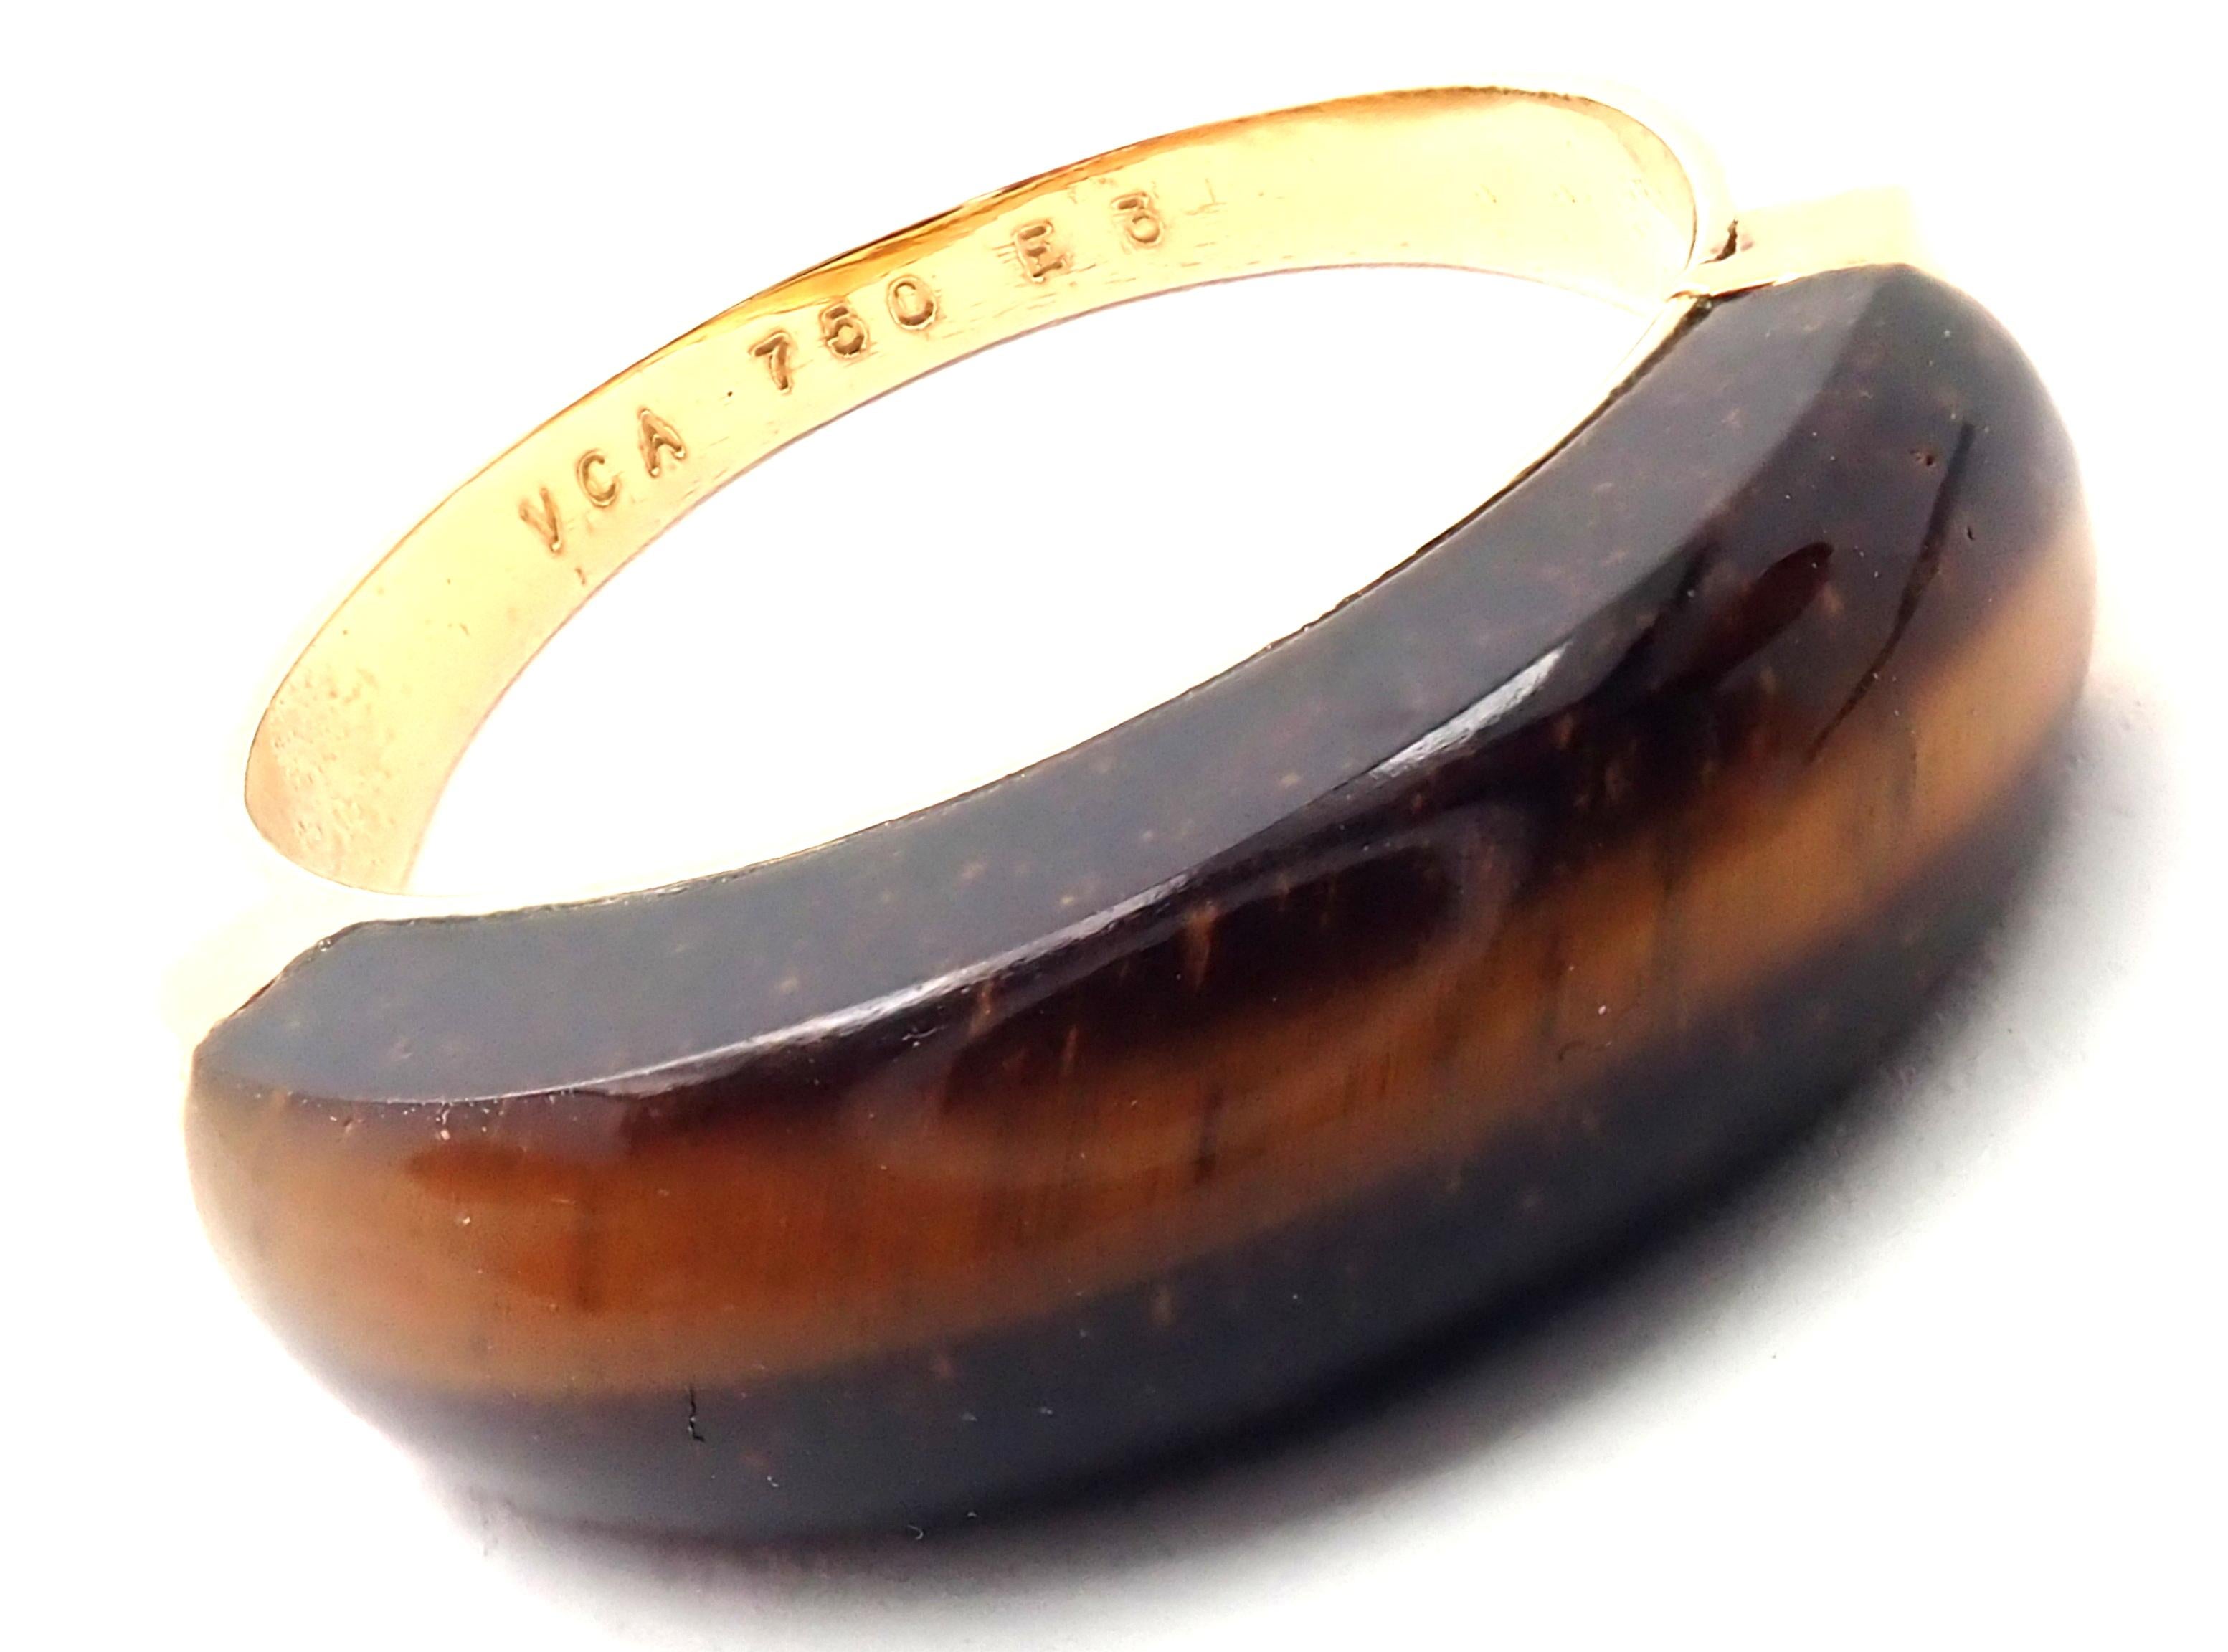 18k Yellow Gold Tiger Eye Band Ring by Van Cleef & Arpels.
With 1 Tiger's Eye
Details: 
Size: 7 1/2 
Width: 7mm
Weight: 3.9 grams
Stamped Hallmarks: VCA 750 E3
*Free Shipping within the United States* 
YOUR PRICE: $2,800
T2965mhtd
